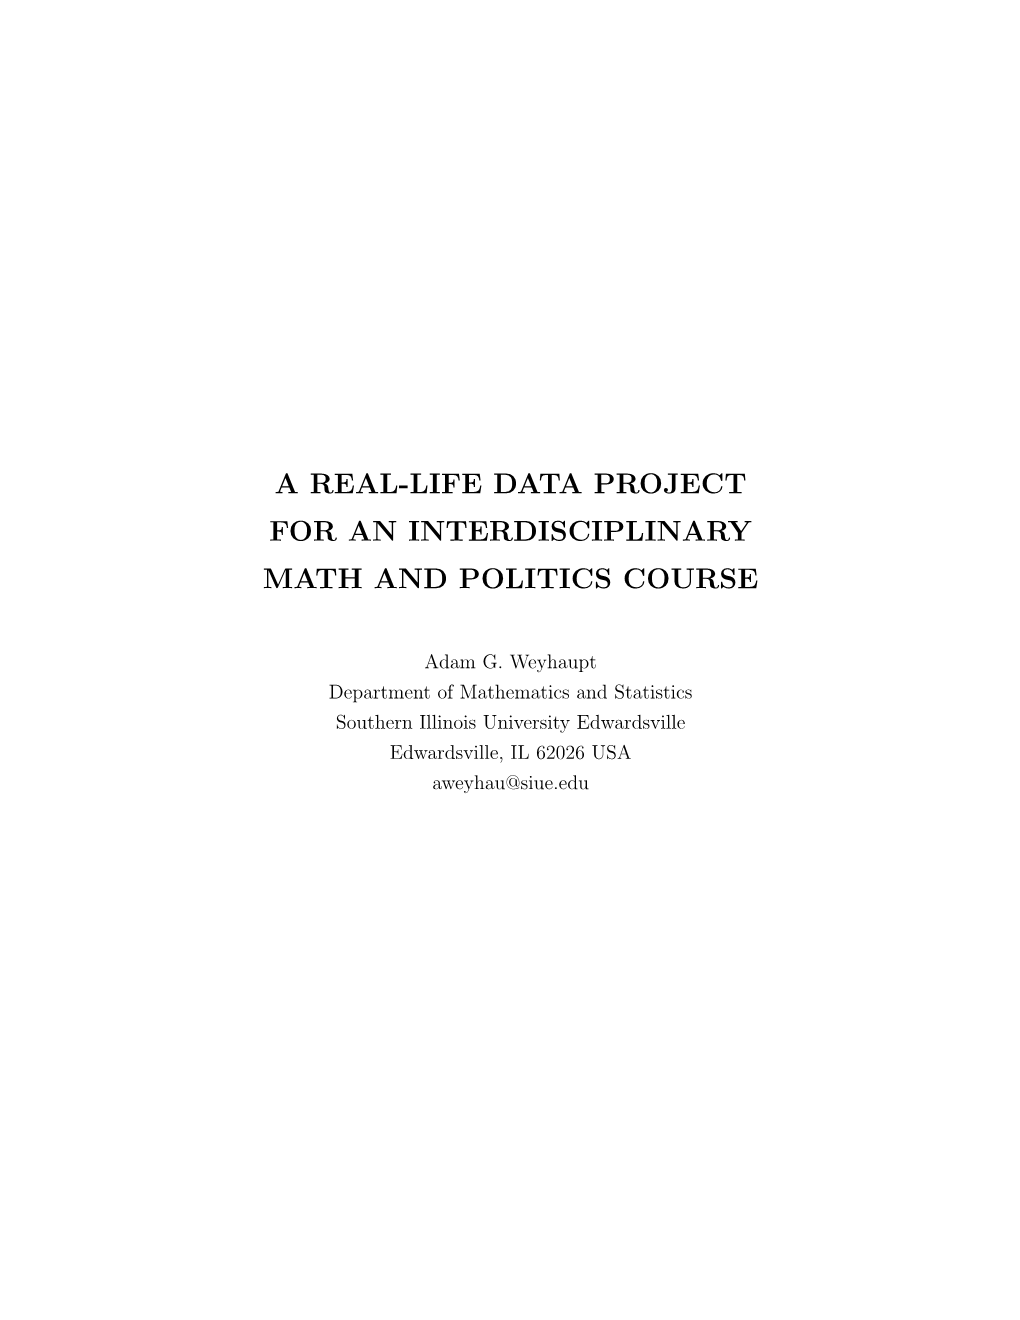 A Real-Life Data Project for an Interdisciplinary Math and Politics Course